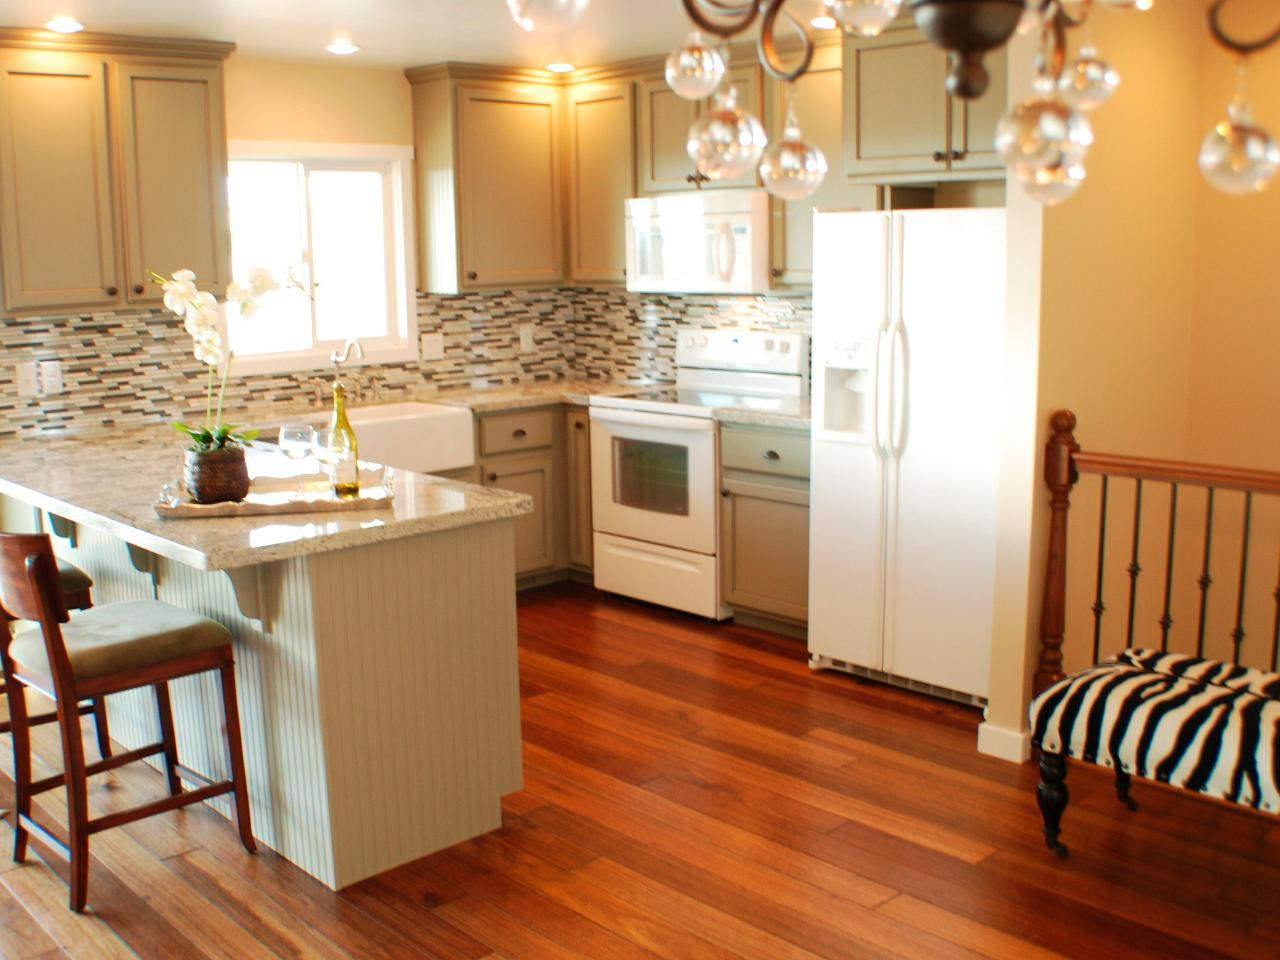 Cheap Kitchen Remodel
 Inexpensive Kitchen Remodel for a Fresh Facelift without